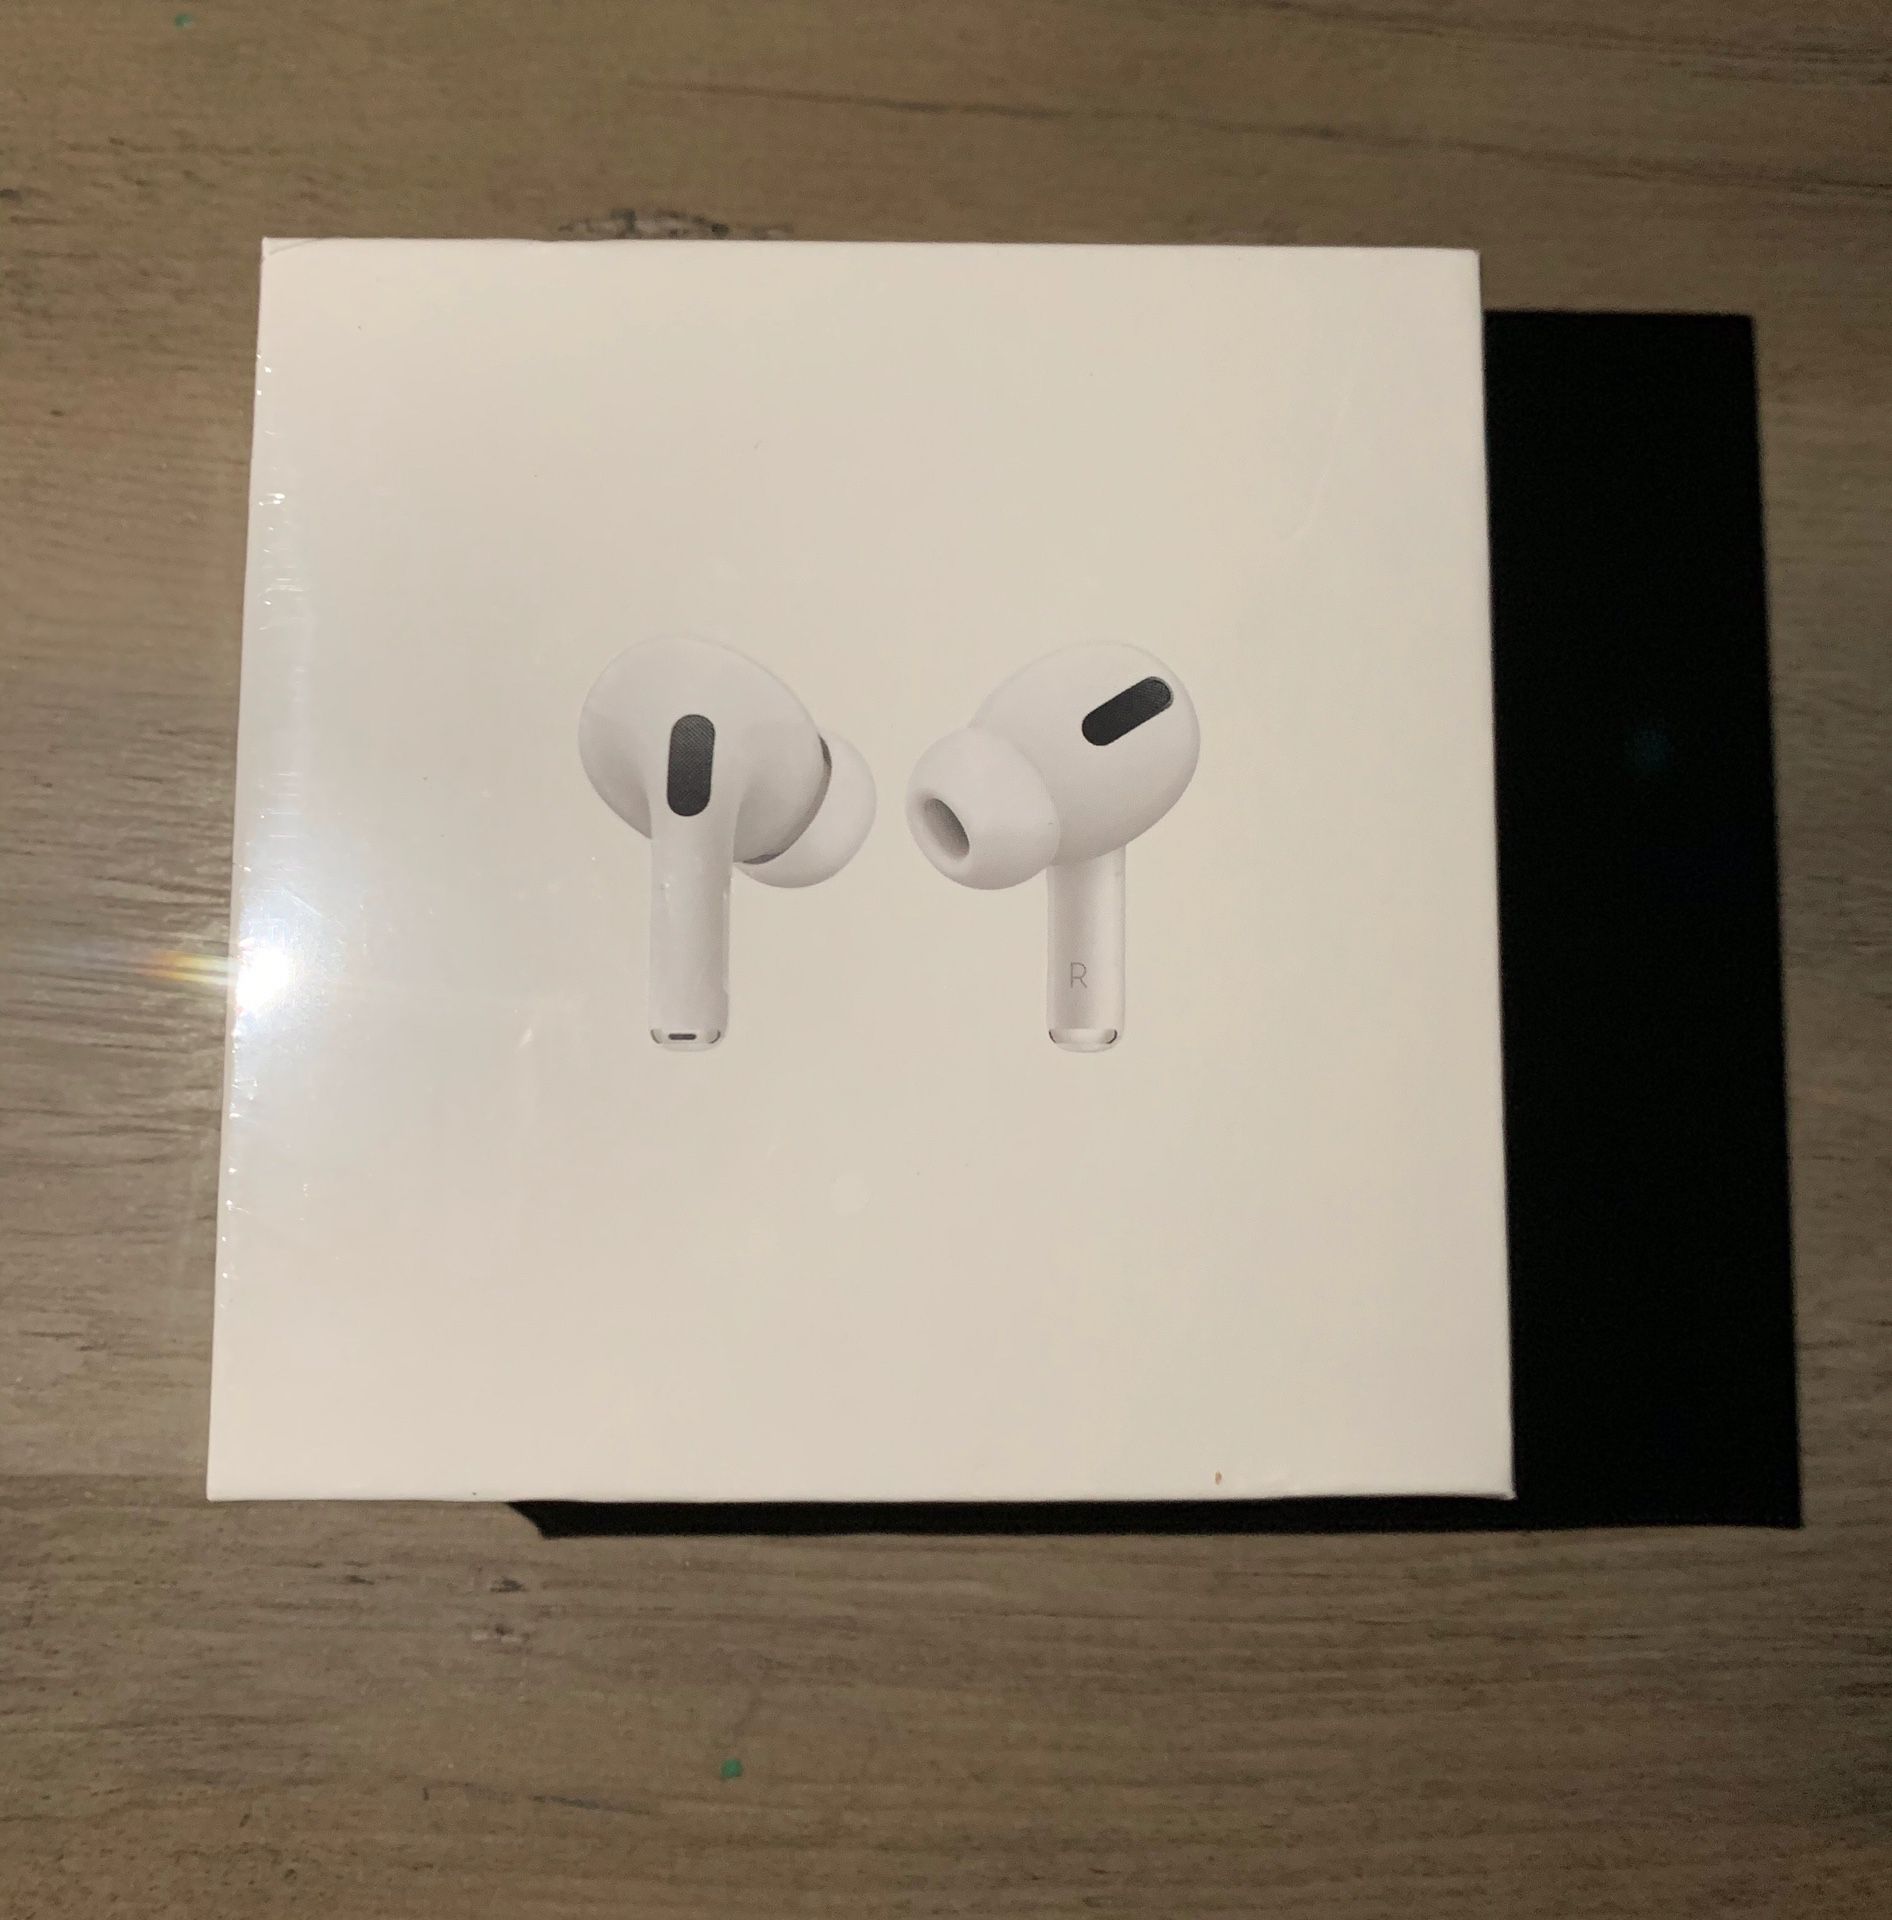 AirPods pros brand new